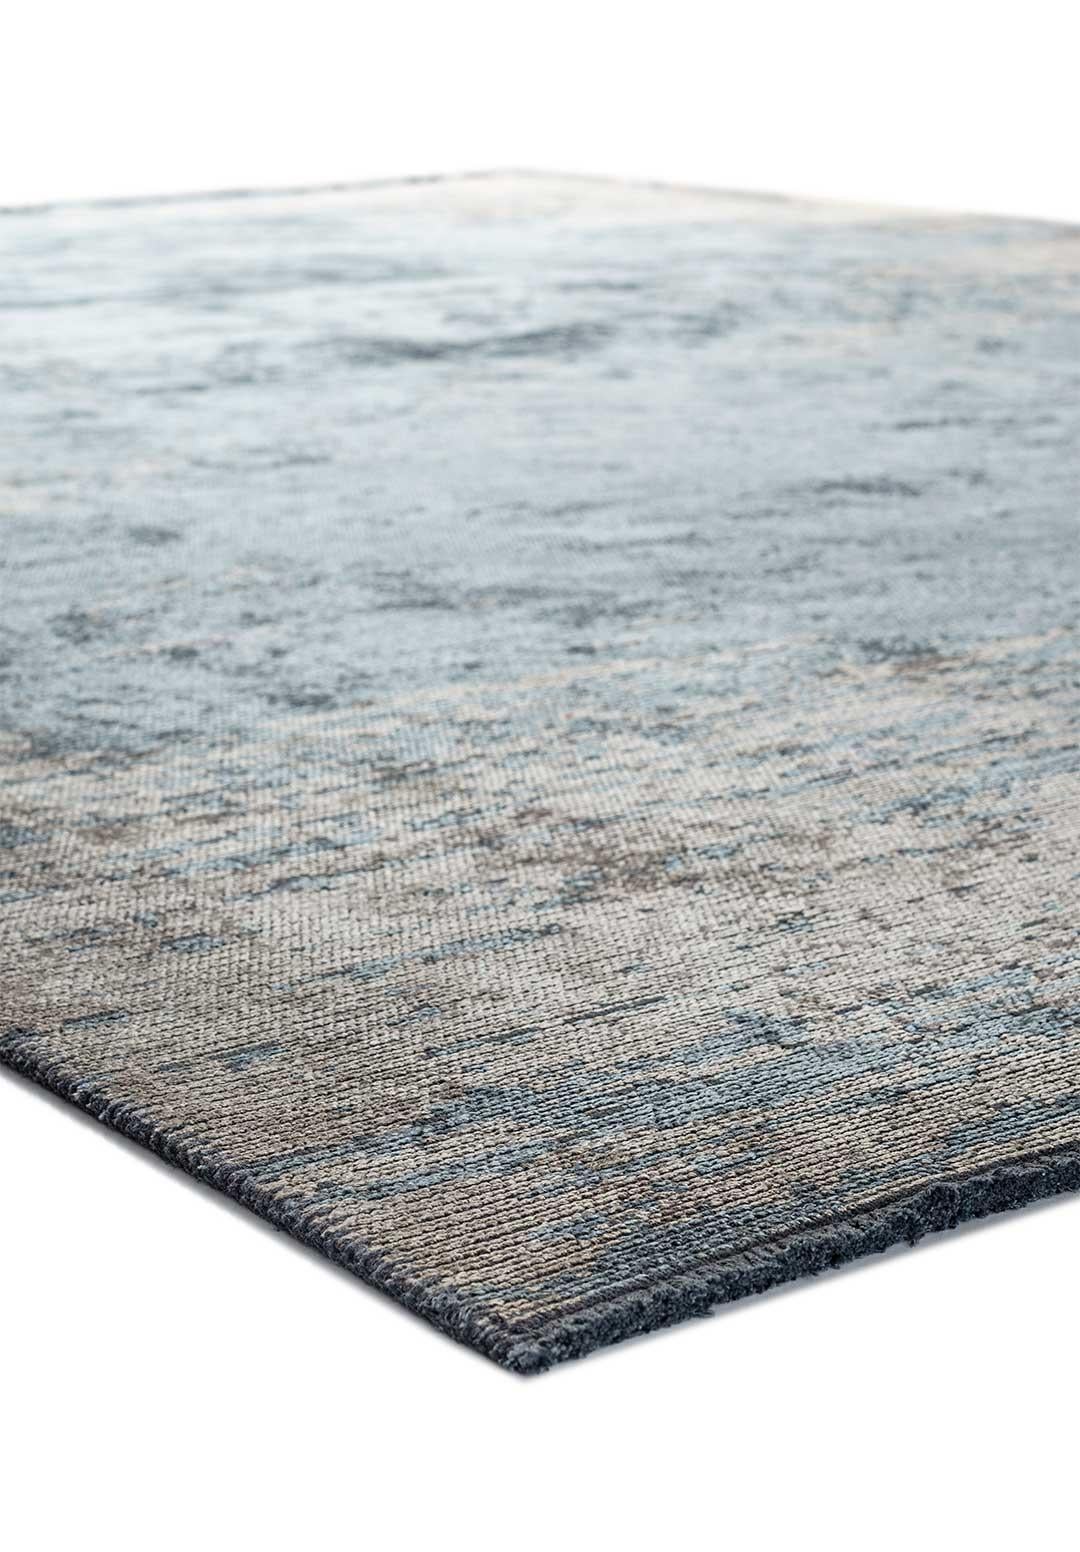 Turkish Modern Light Blue Silver Abstract Chenille Rug Without Fringe Ready to Ship For Sale